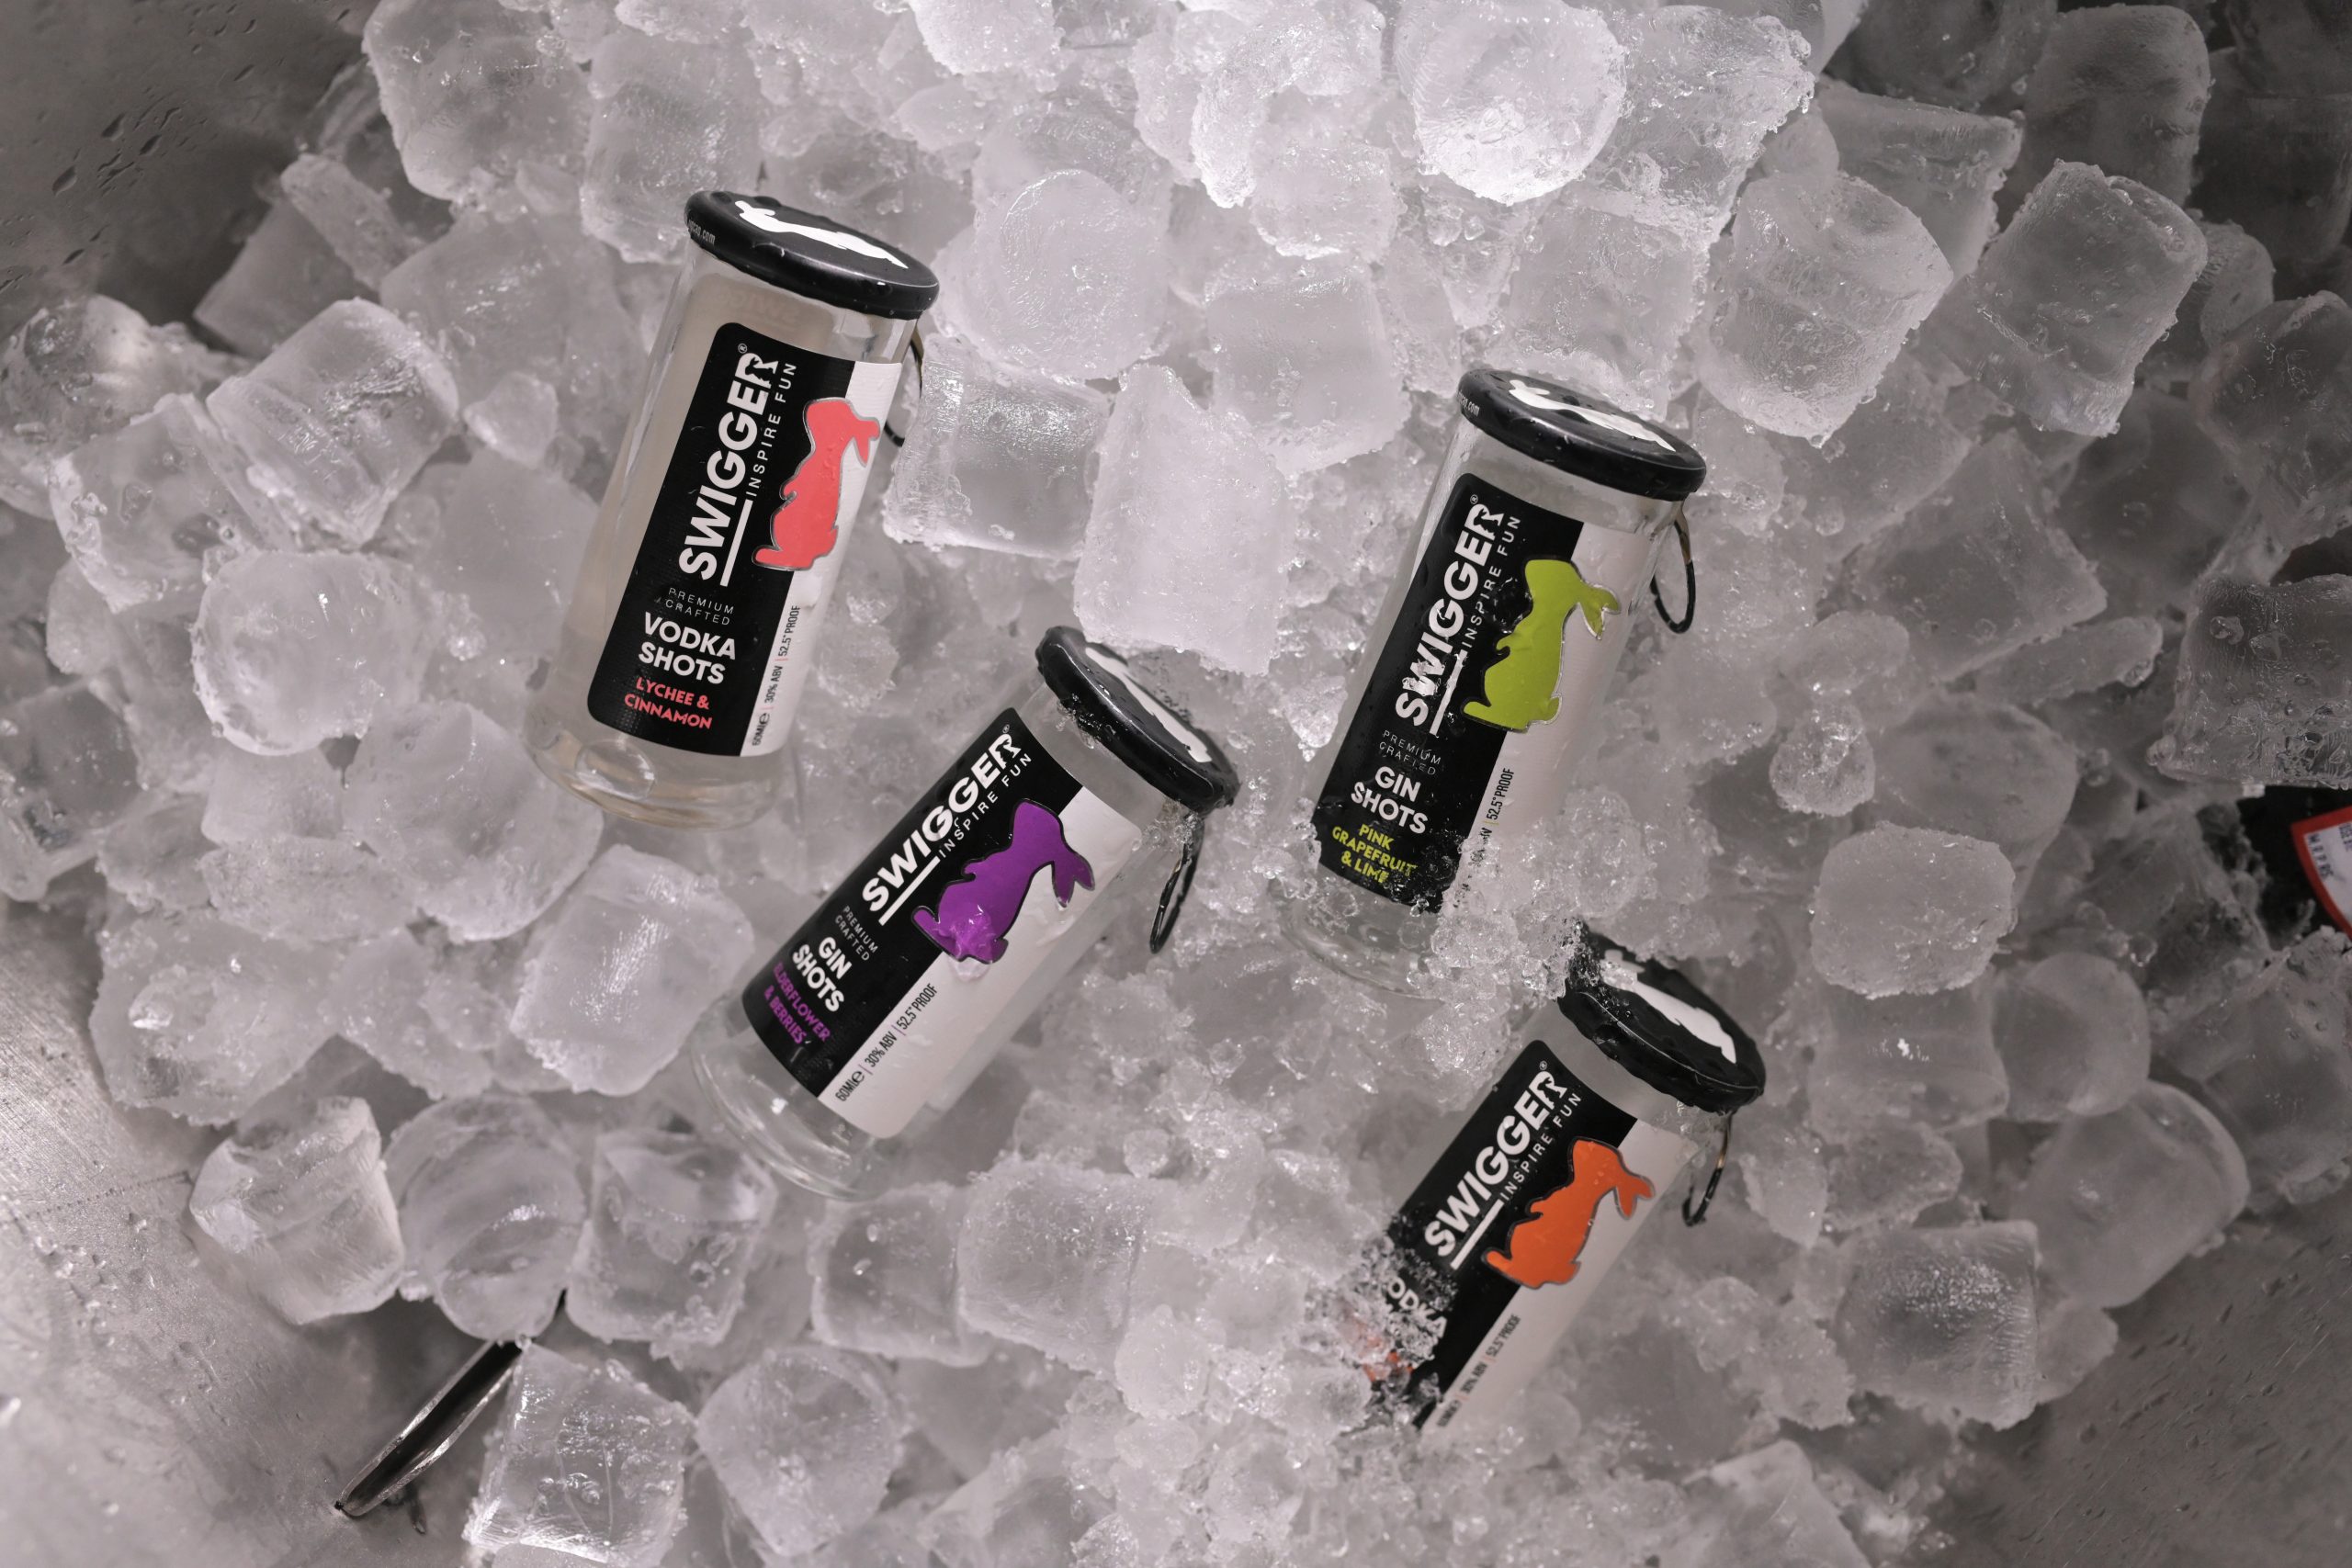 India’s First Spirits-Based Ready-to-Drink Shots SWIGGER launched 33